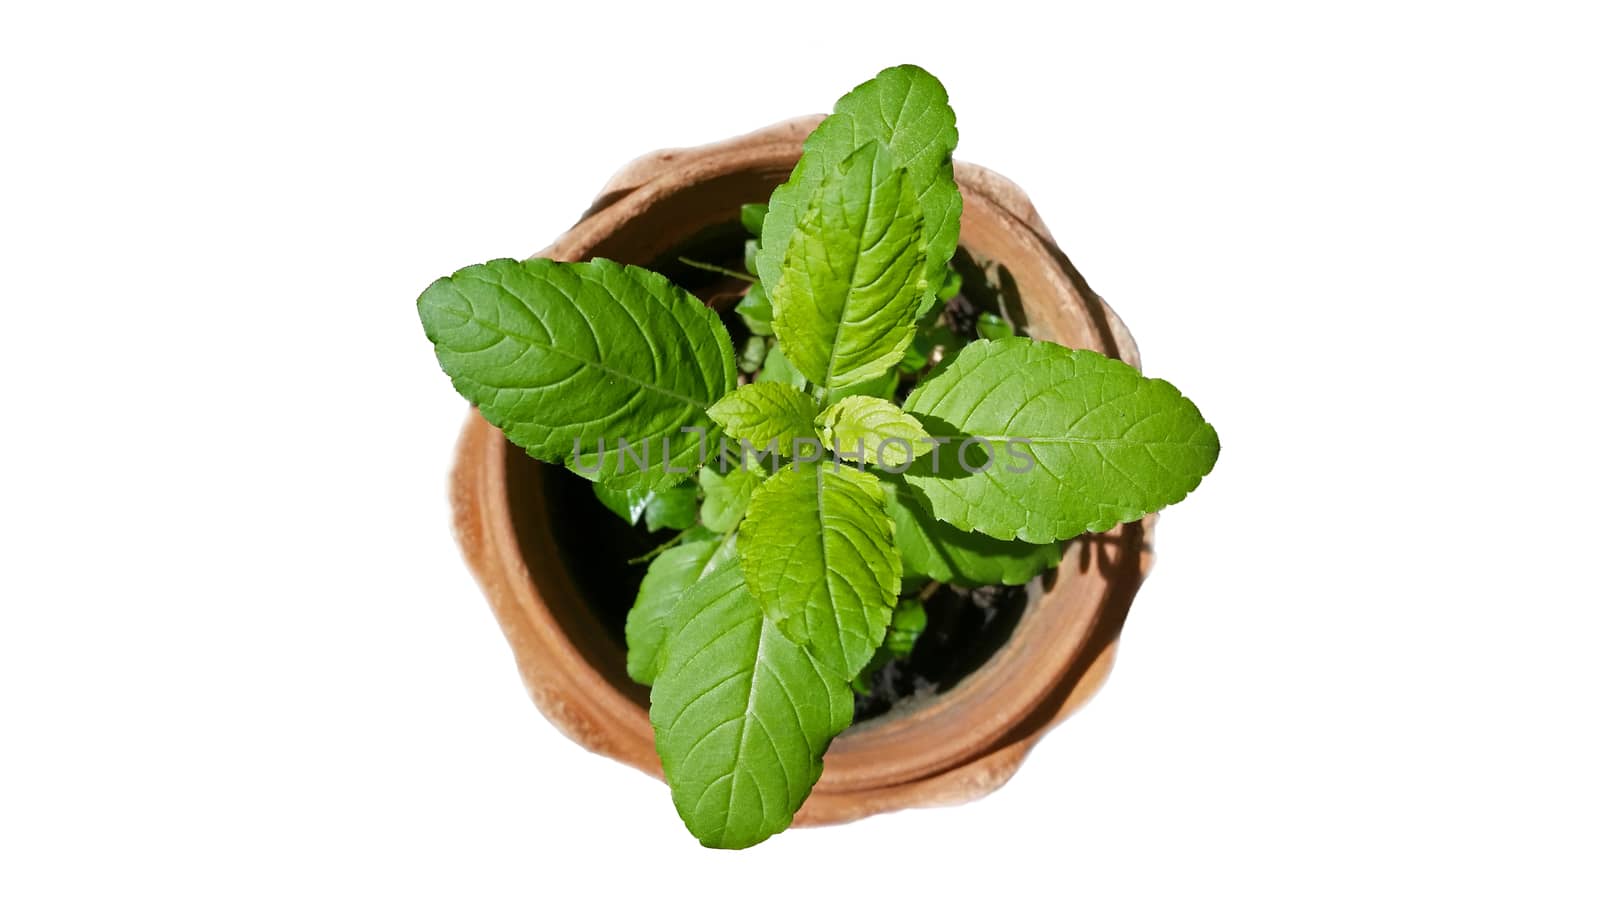 Holy basil plant by arraymax